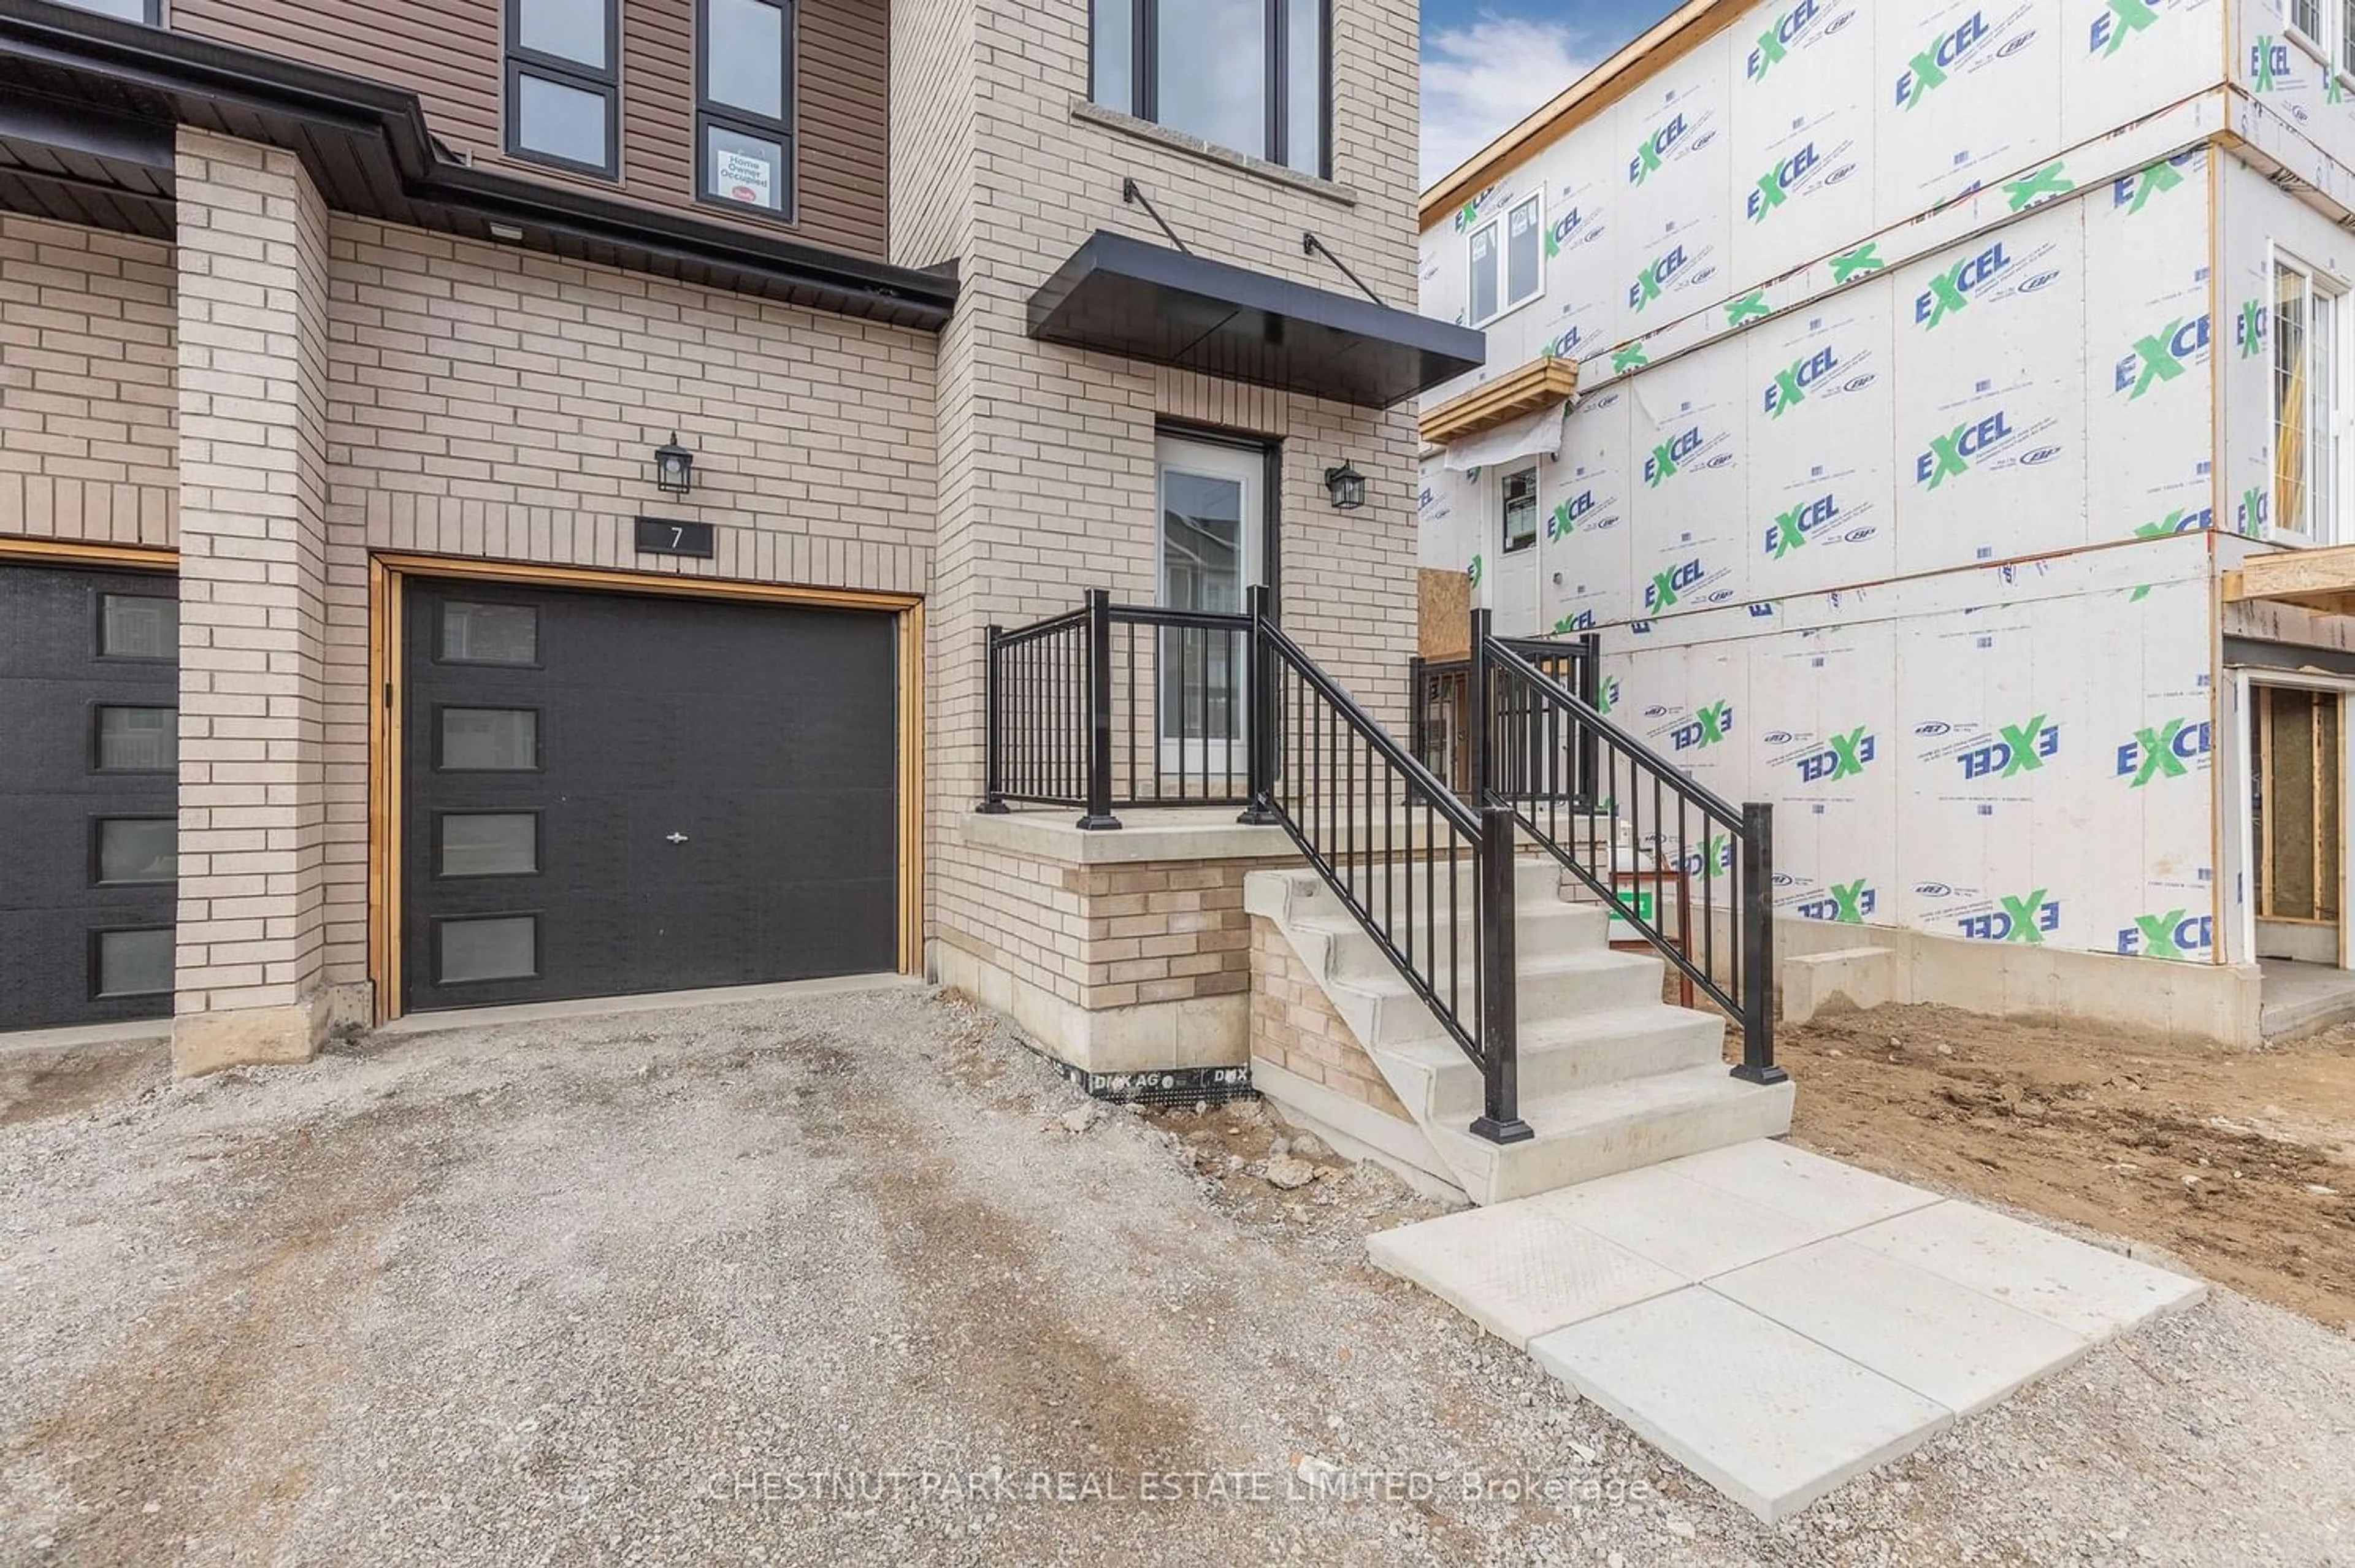 Home with brick exterior material for 7 Hay Lane, Barrie Ontario L9J 0C2